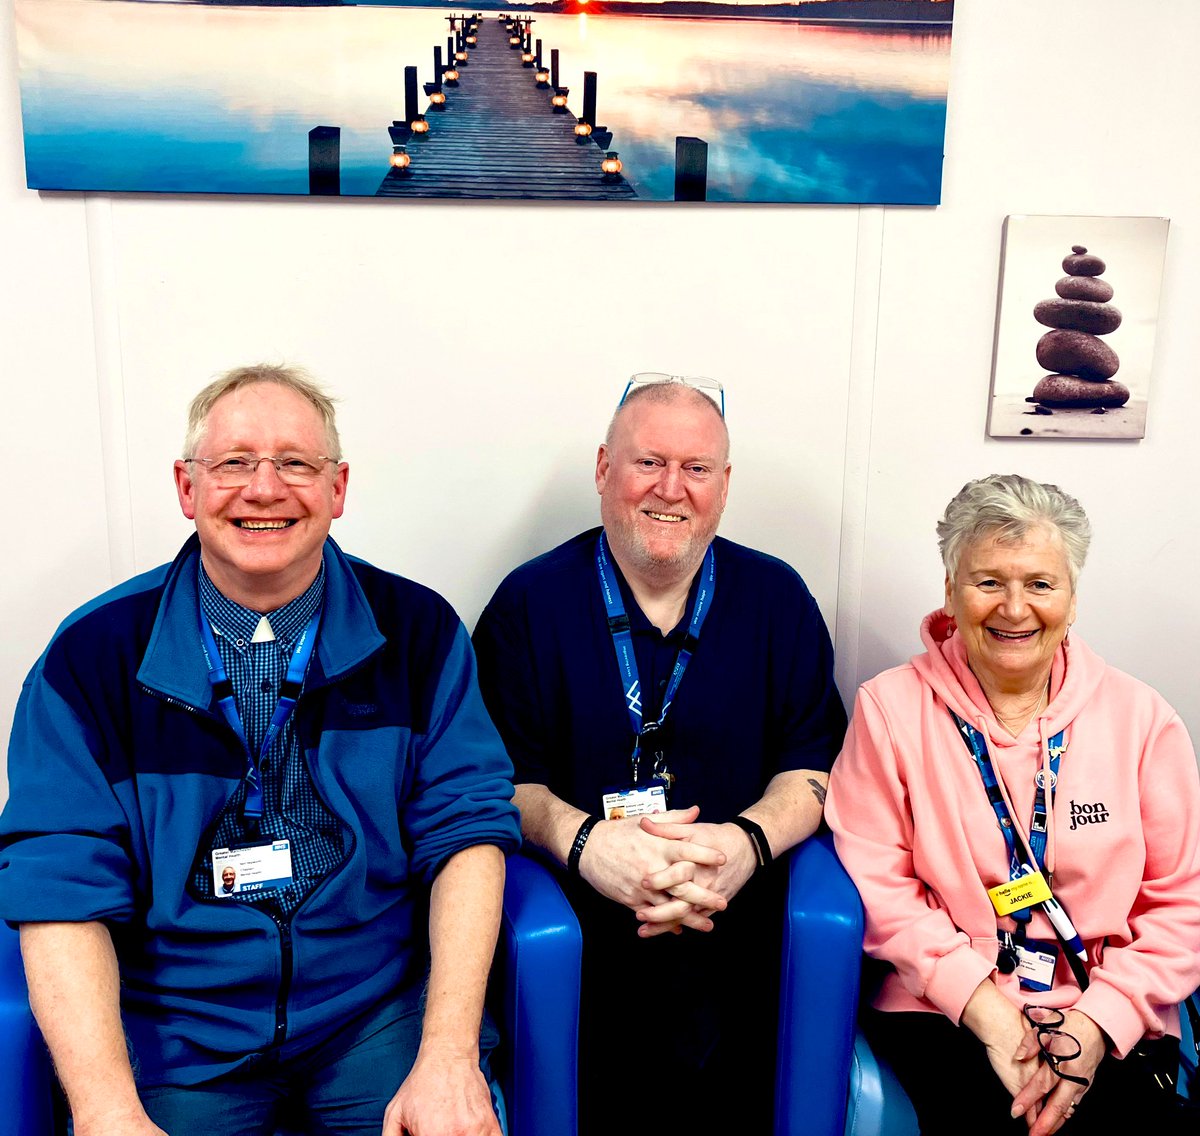 Huge thank you to our Chaplain Neil for being the first speaker at our CBU Conversation Cafe. Such a lovely afternoon chatting about spirituality and what it means to different people. @jdurkintc @AndersonJanella @maryabberton @stephenkaar @FooFooLaRue @AdamC_NHS @GMMH_NHS @hilts